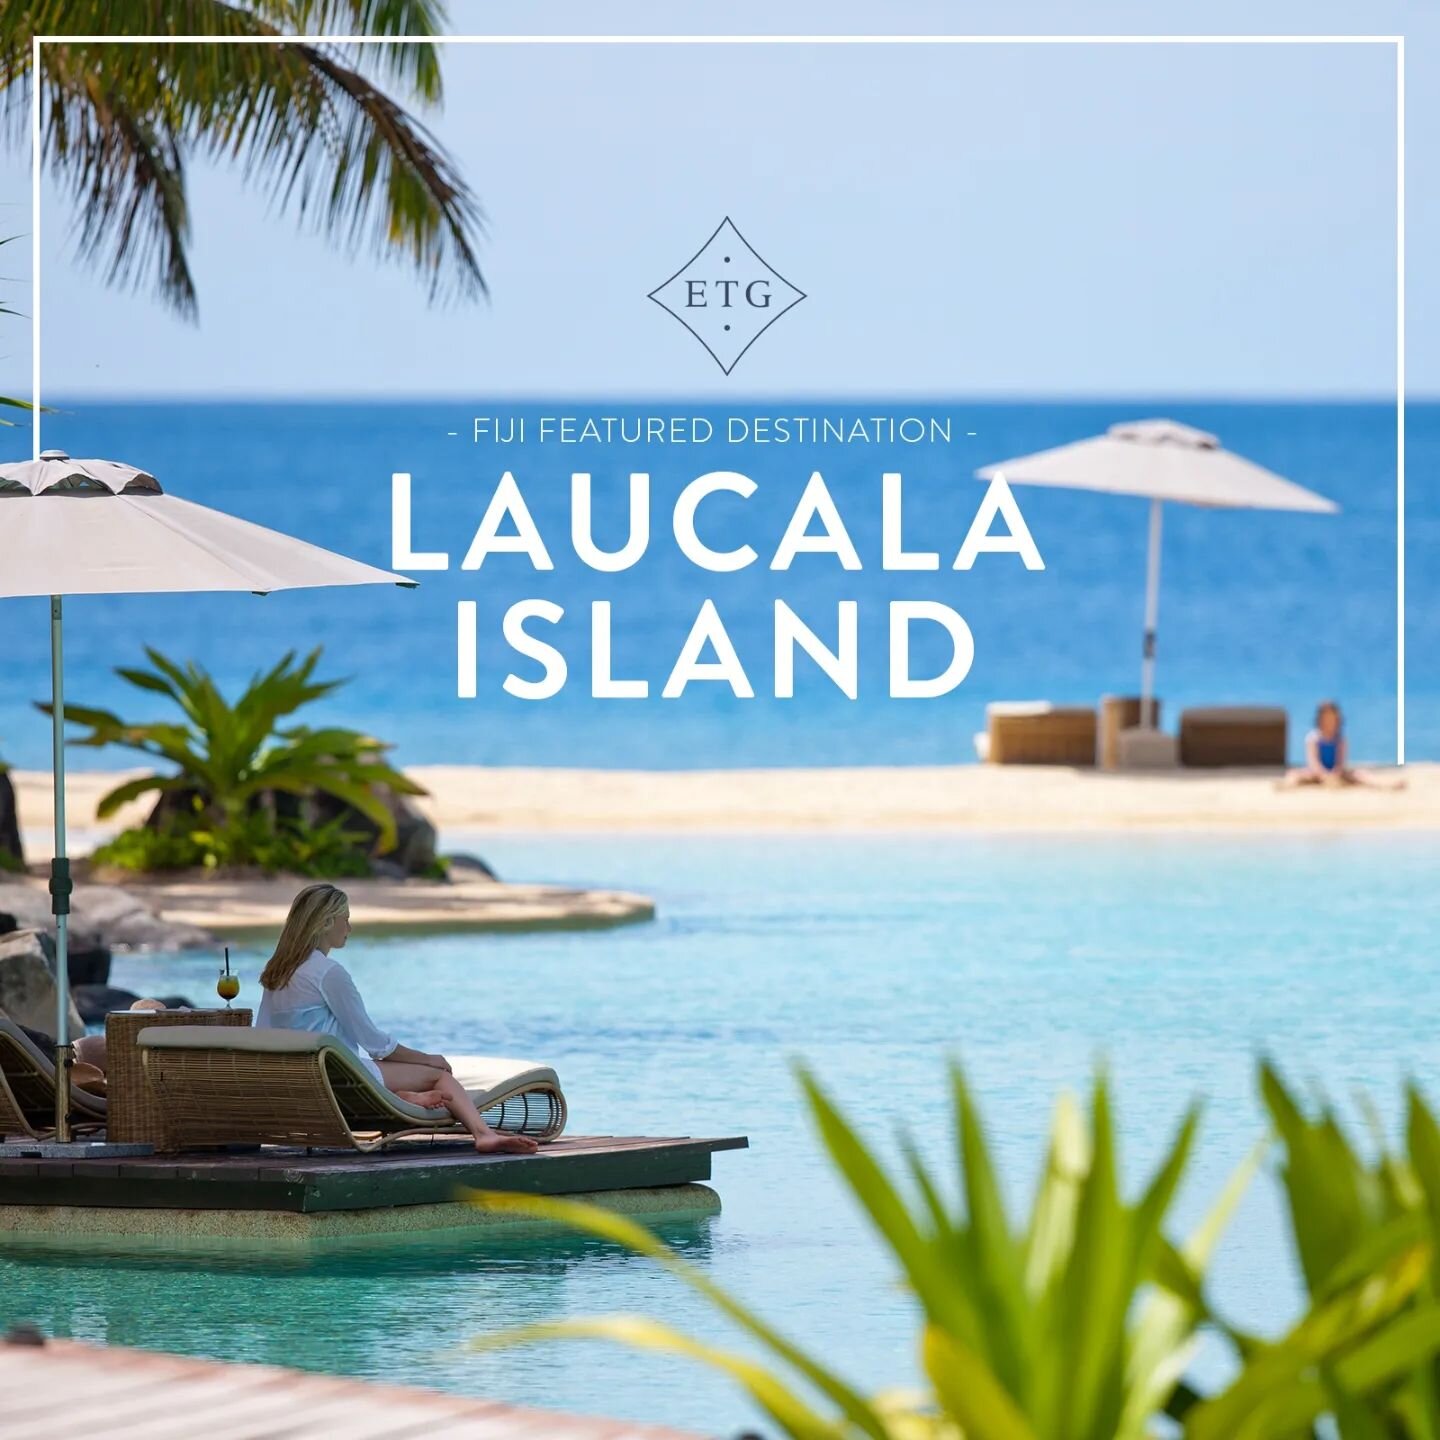 When you crave ultimate luxury, Laucala Island will deliver one of the most intimate and rare island experiences on our beautiful planet. Money is no object here. 

Clients who have stayed, enjoyed it so much, they've been in tears when departing!

O